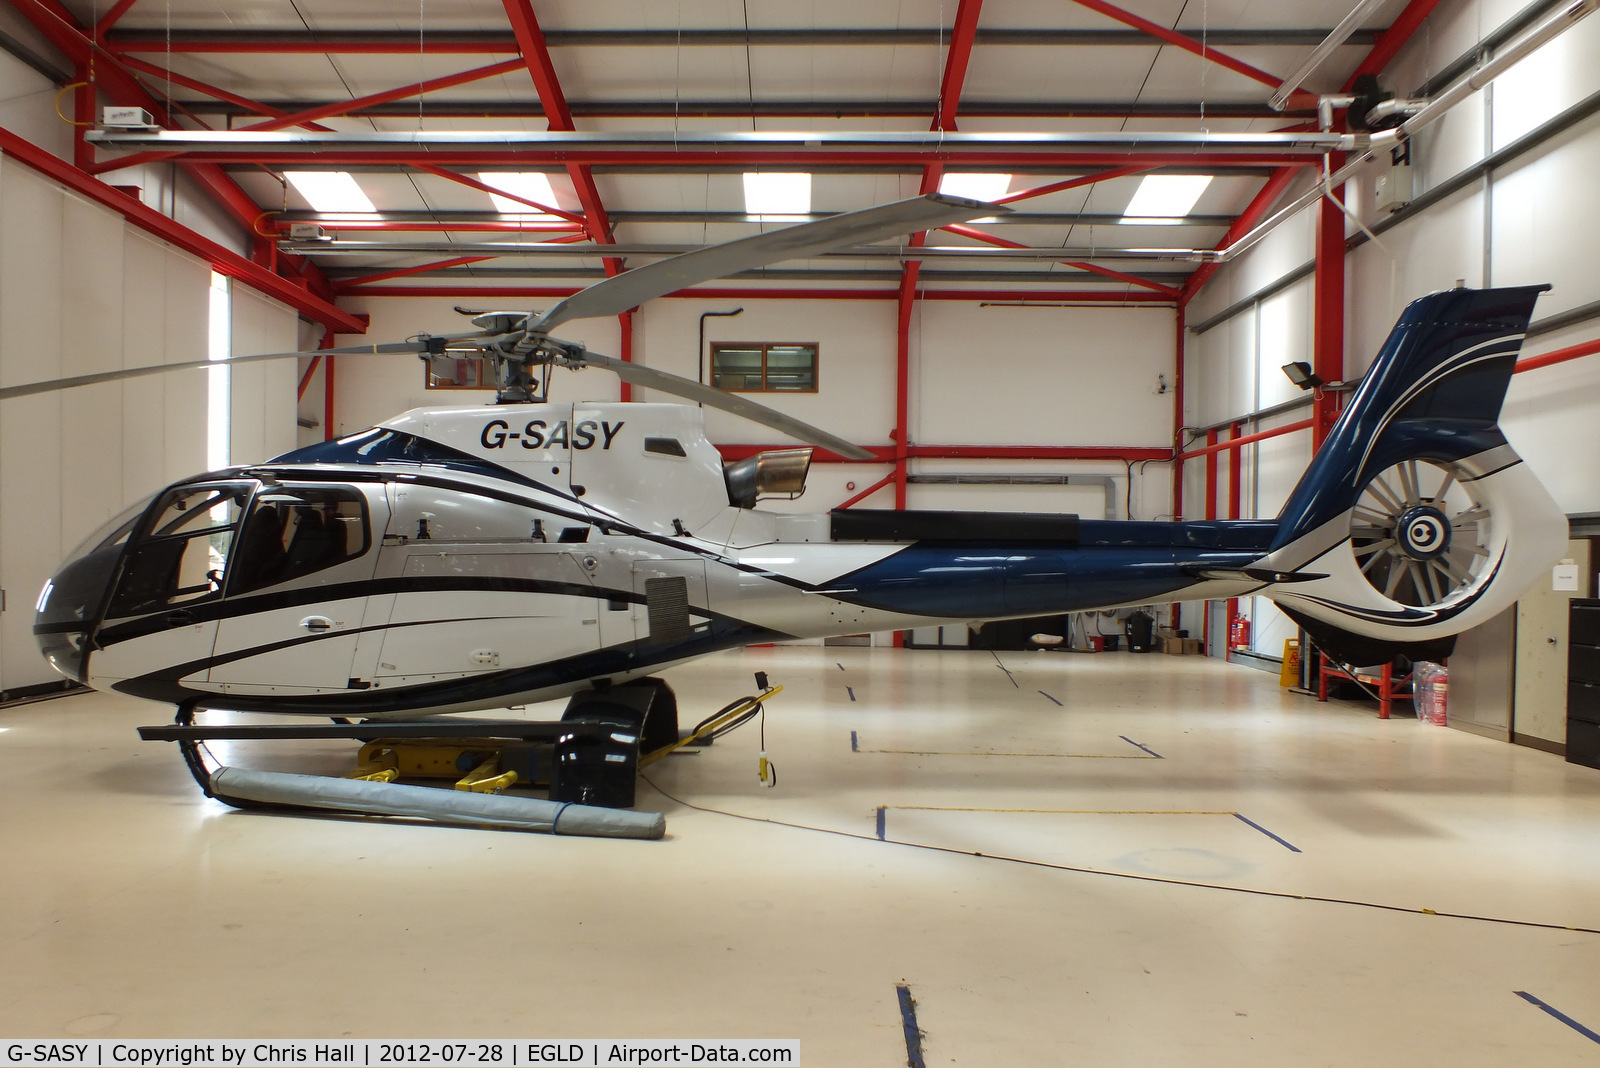 G-SASY, 2009 Eurocopter EC-130B-4 (AS-350B-4) C/N 4760, privately owned